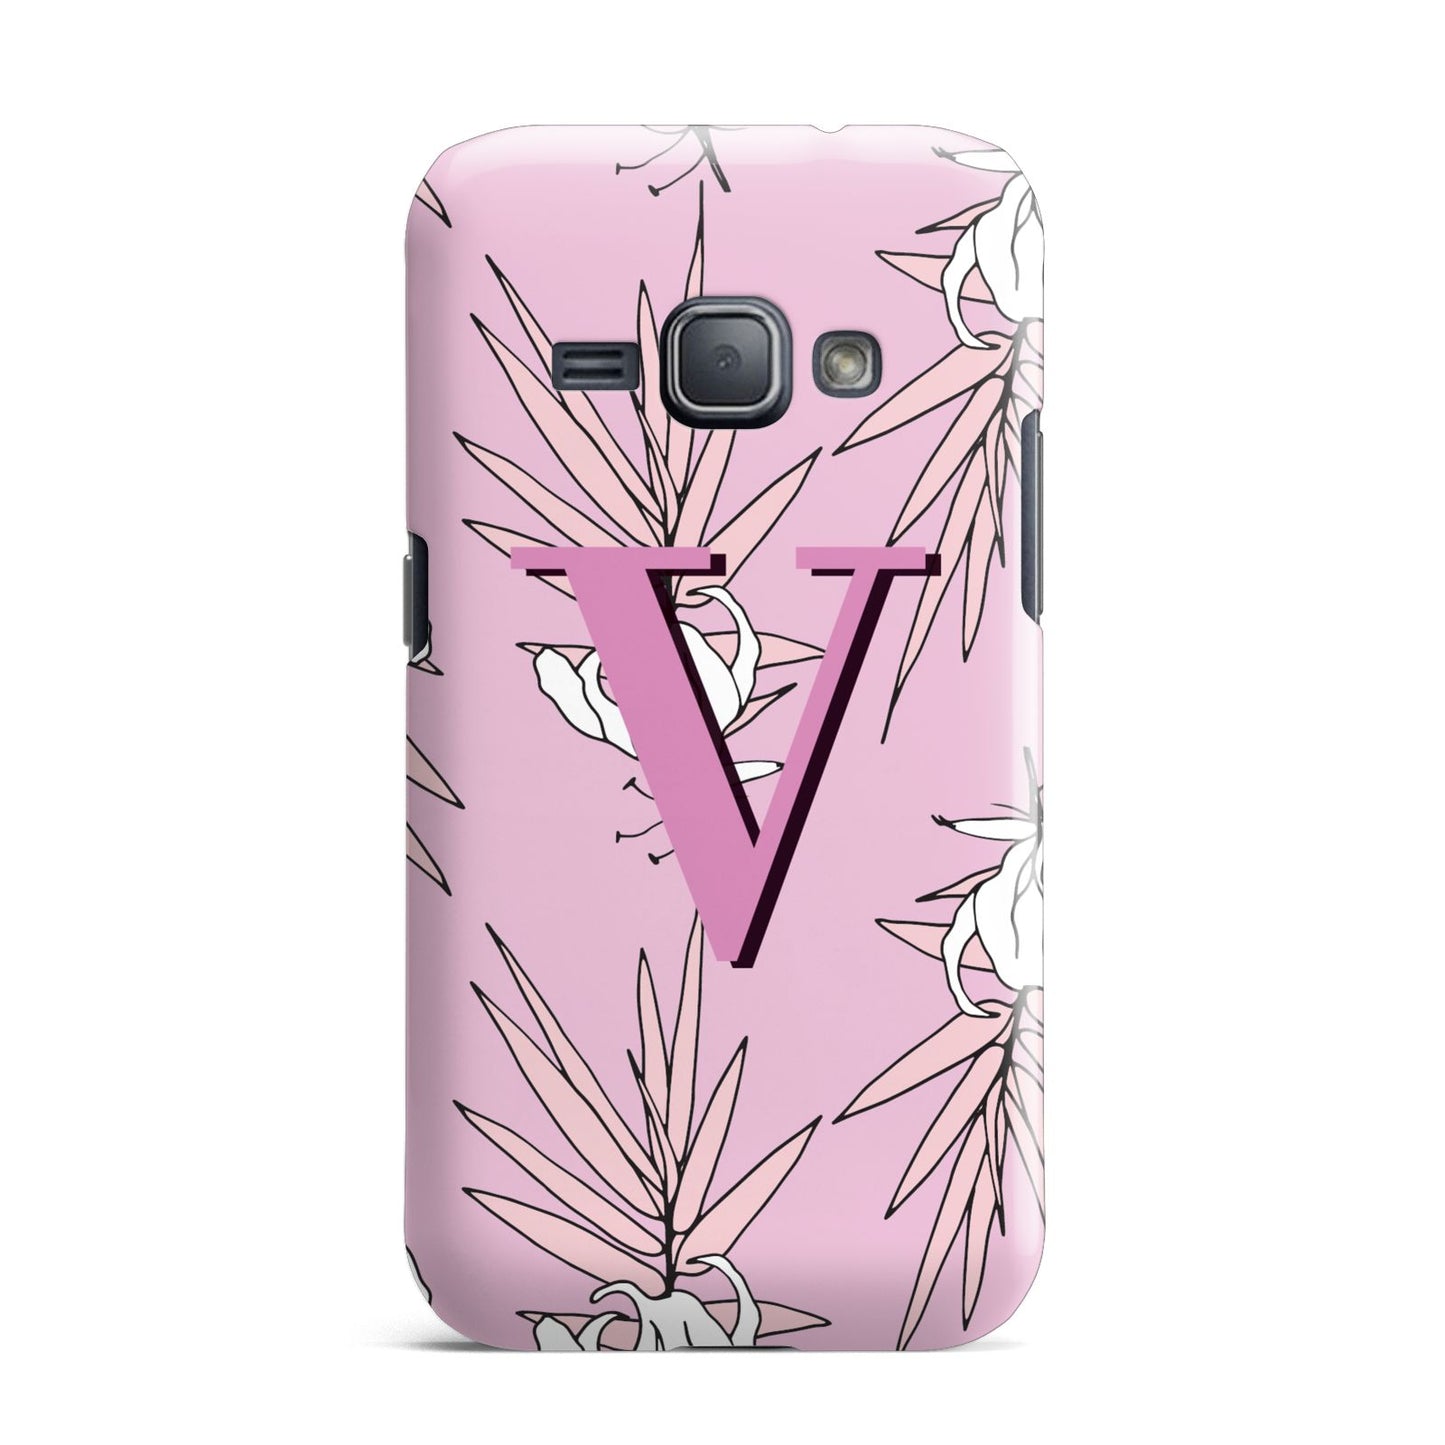 Personalised Pink and White Floral Monogram Samsung Galaxy J1 2016 Case